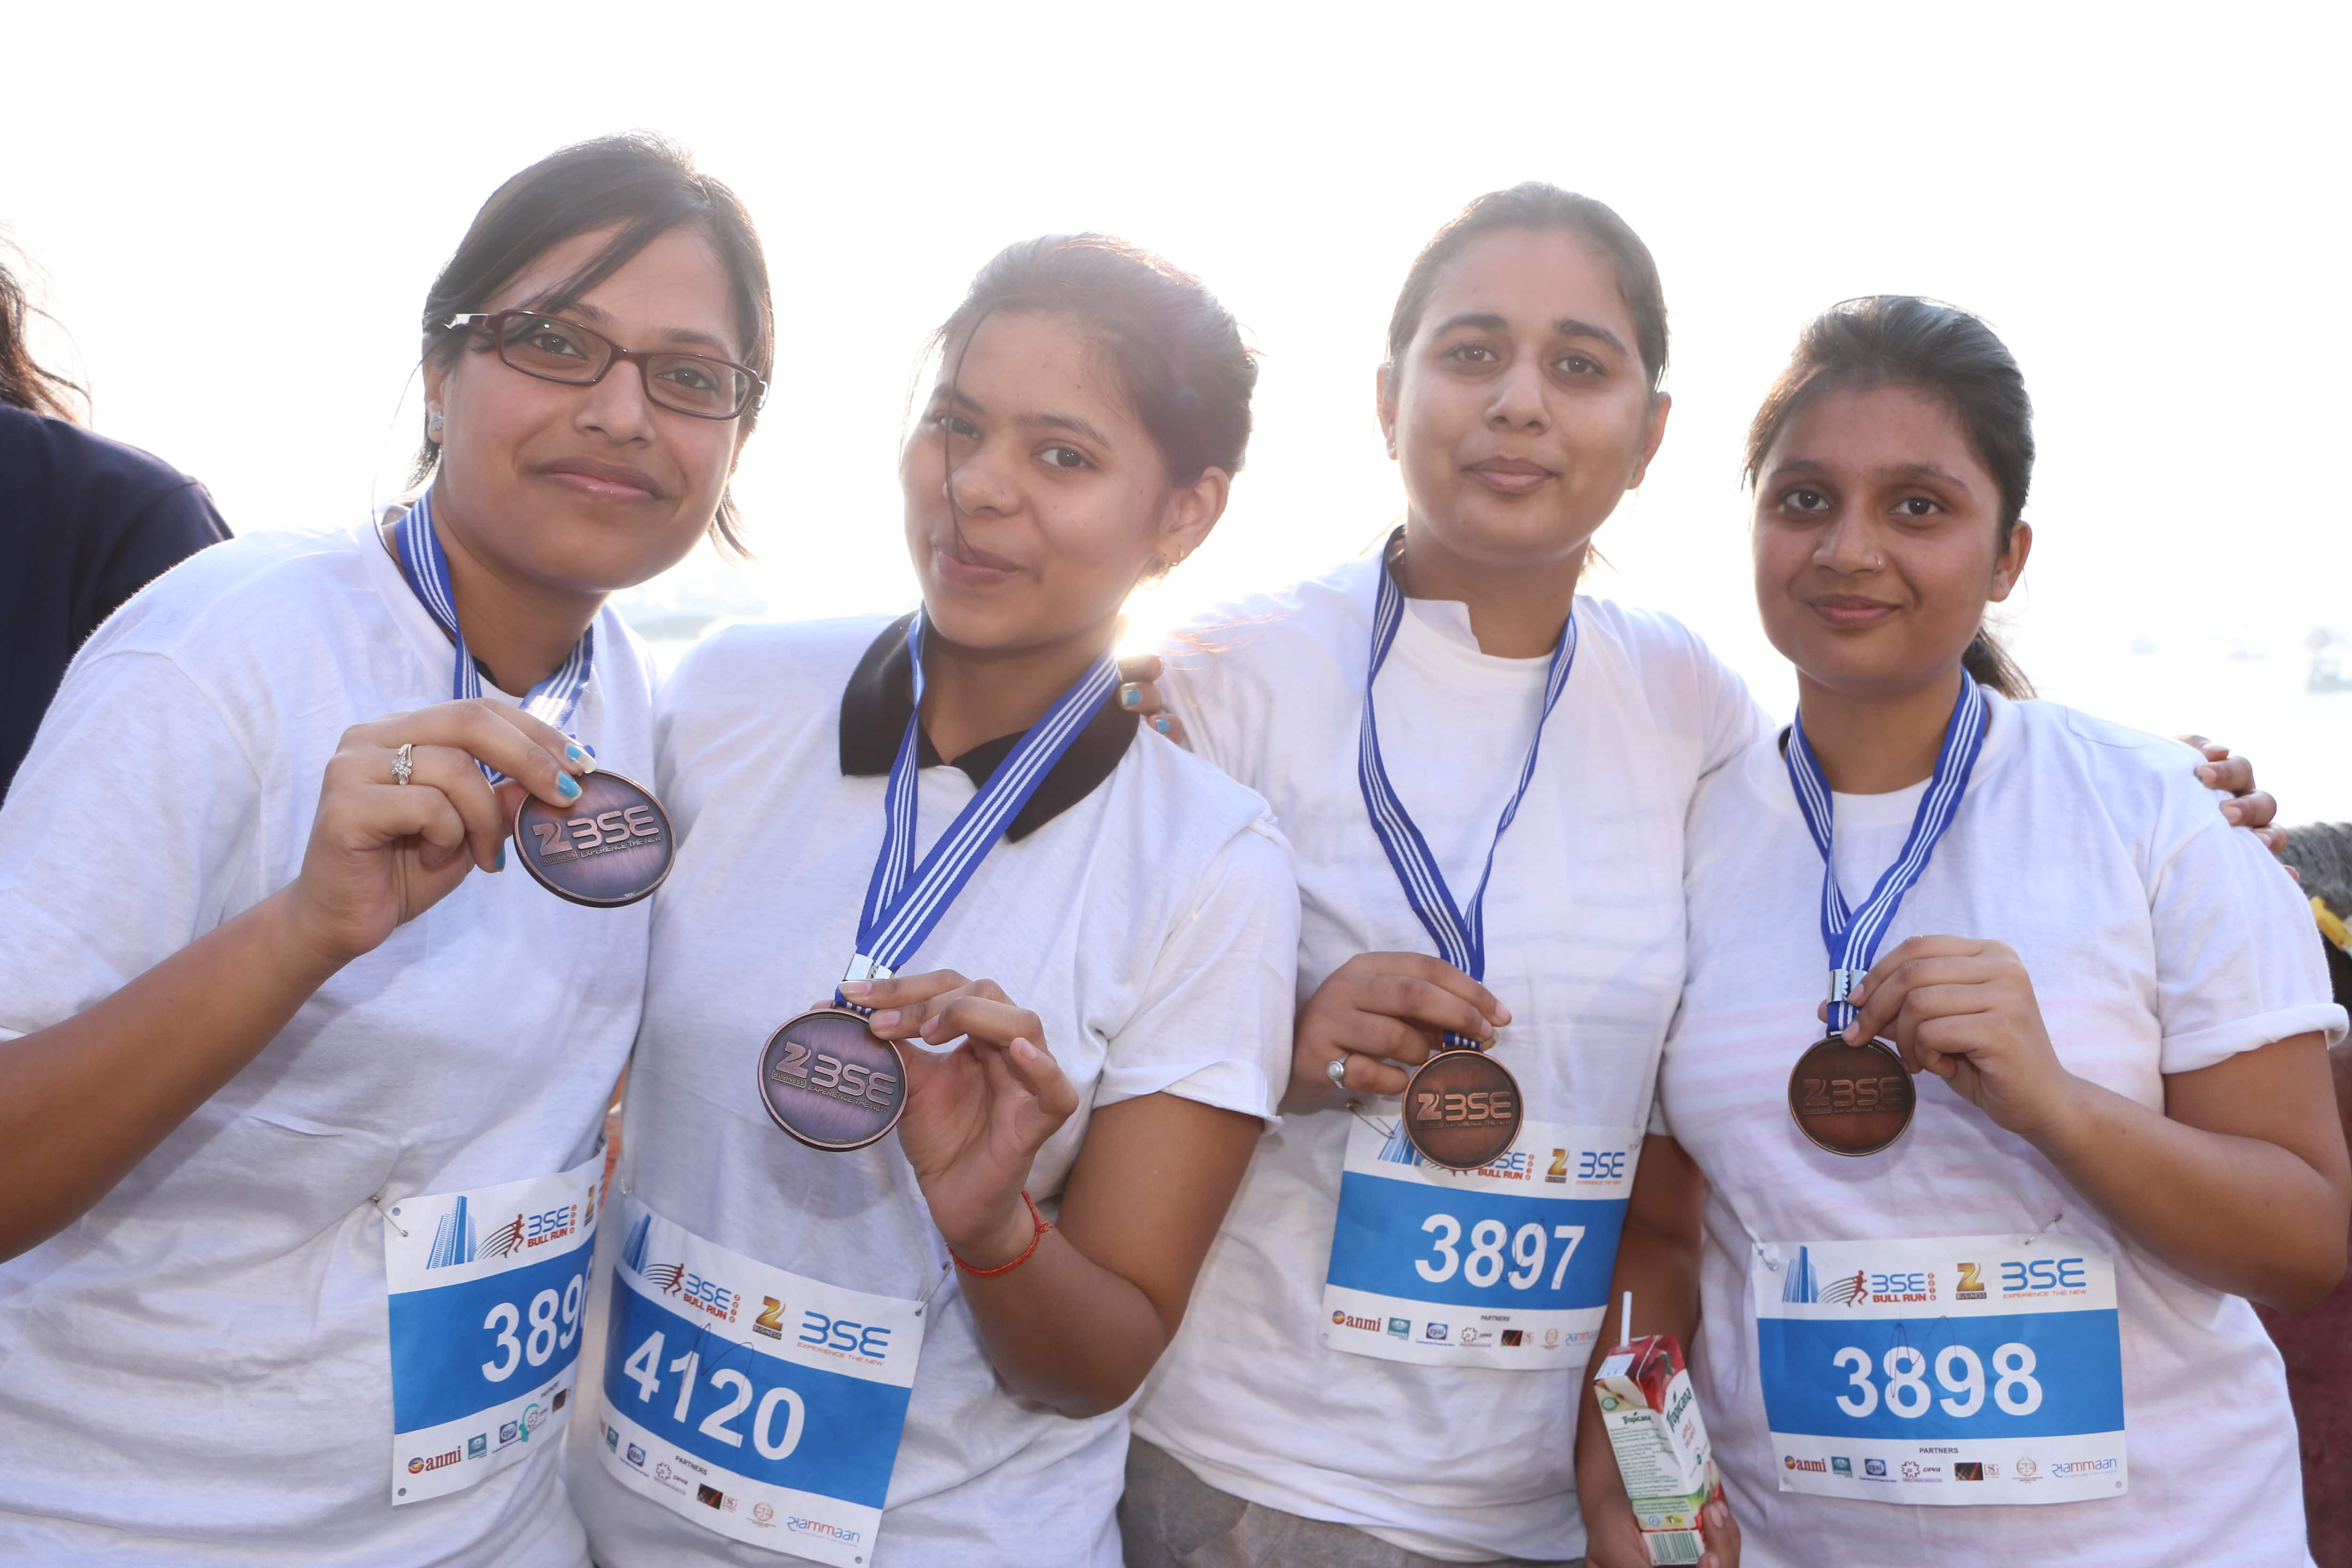 Participants of the BSE Bull Run 2017 in high spirits.